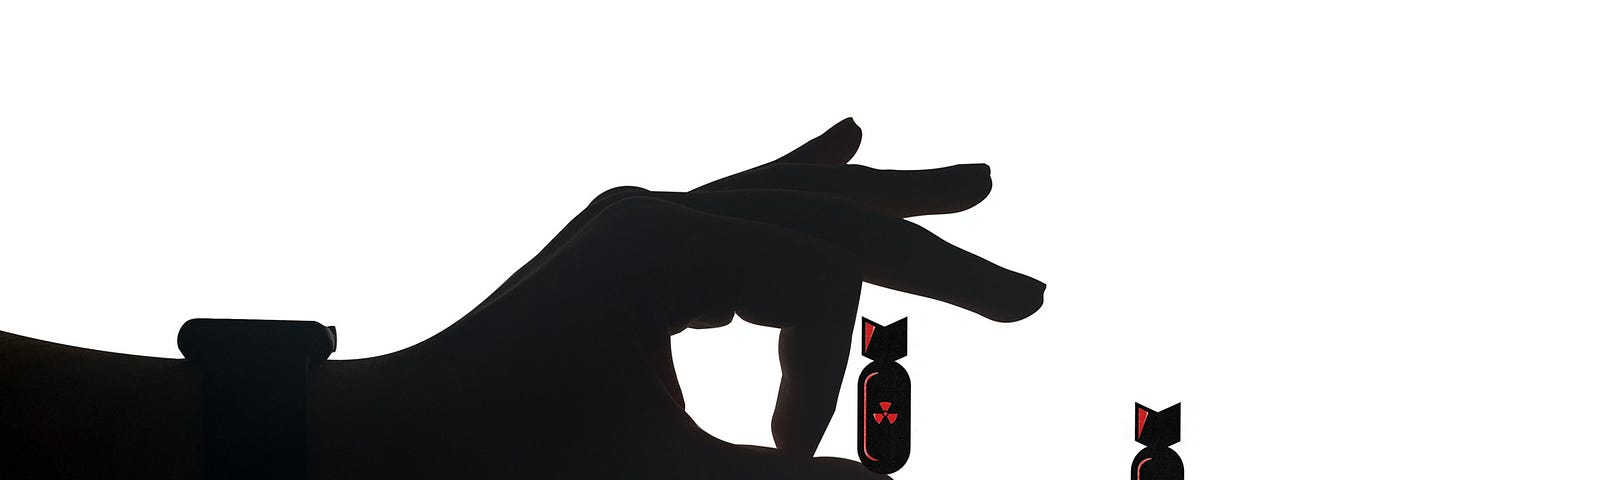 A clean silhouette illustration of a hand with a smartwatch flicking nuclear bombs with ease.